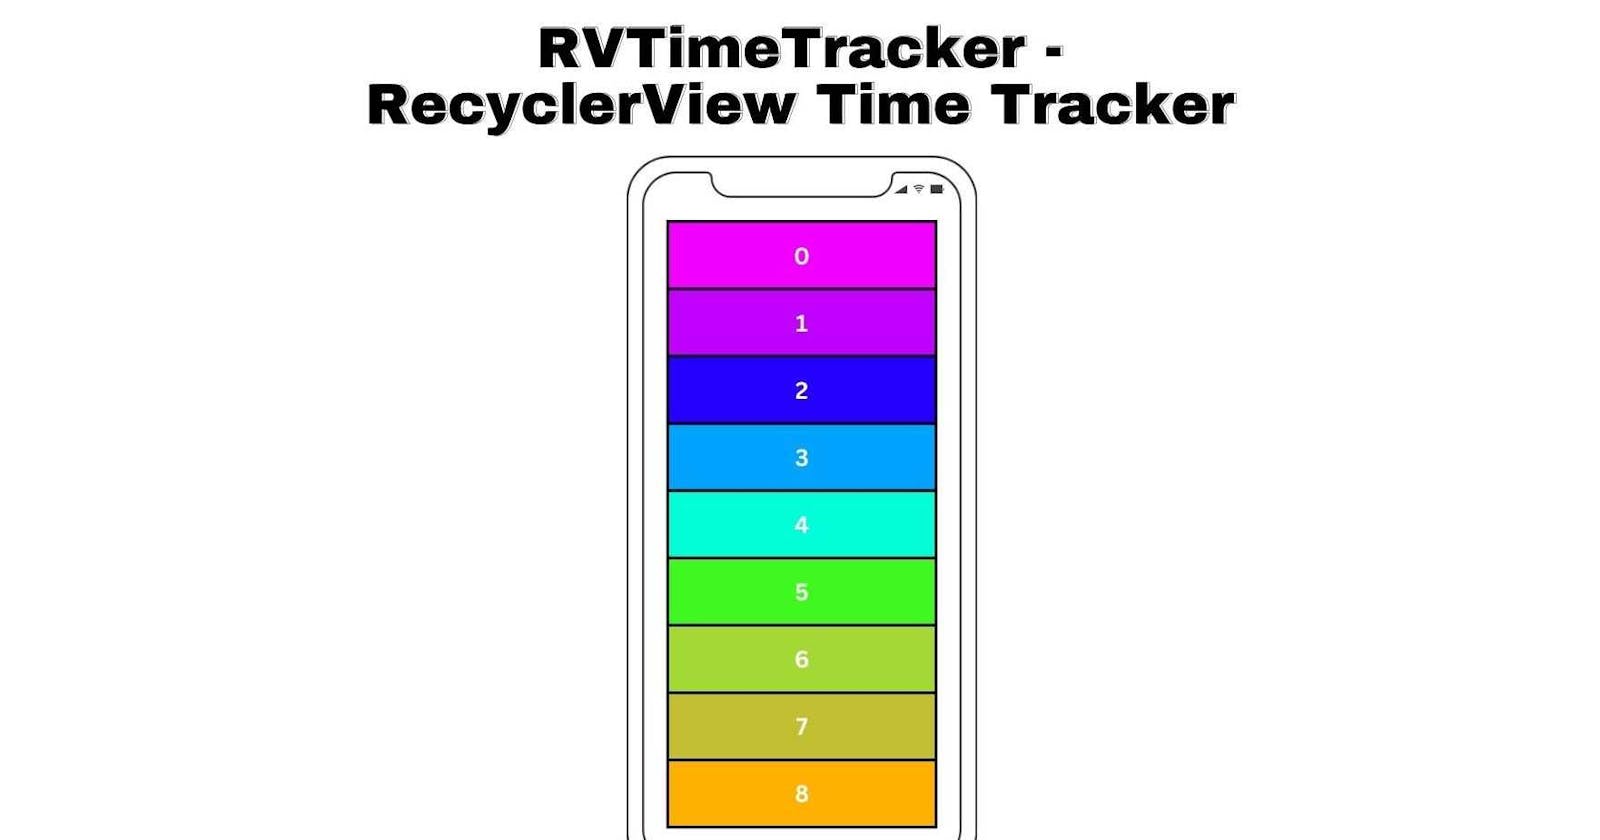 Introducing RVTimeTracker - RecyclerView Time Tracker